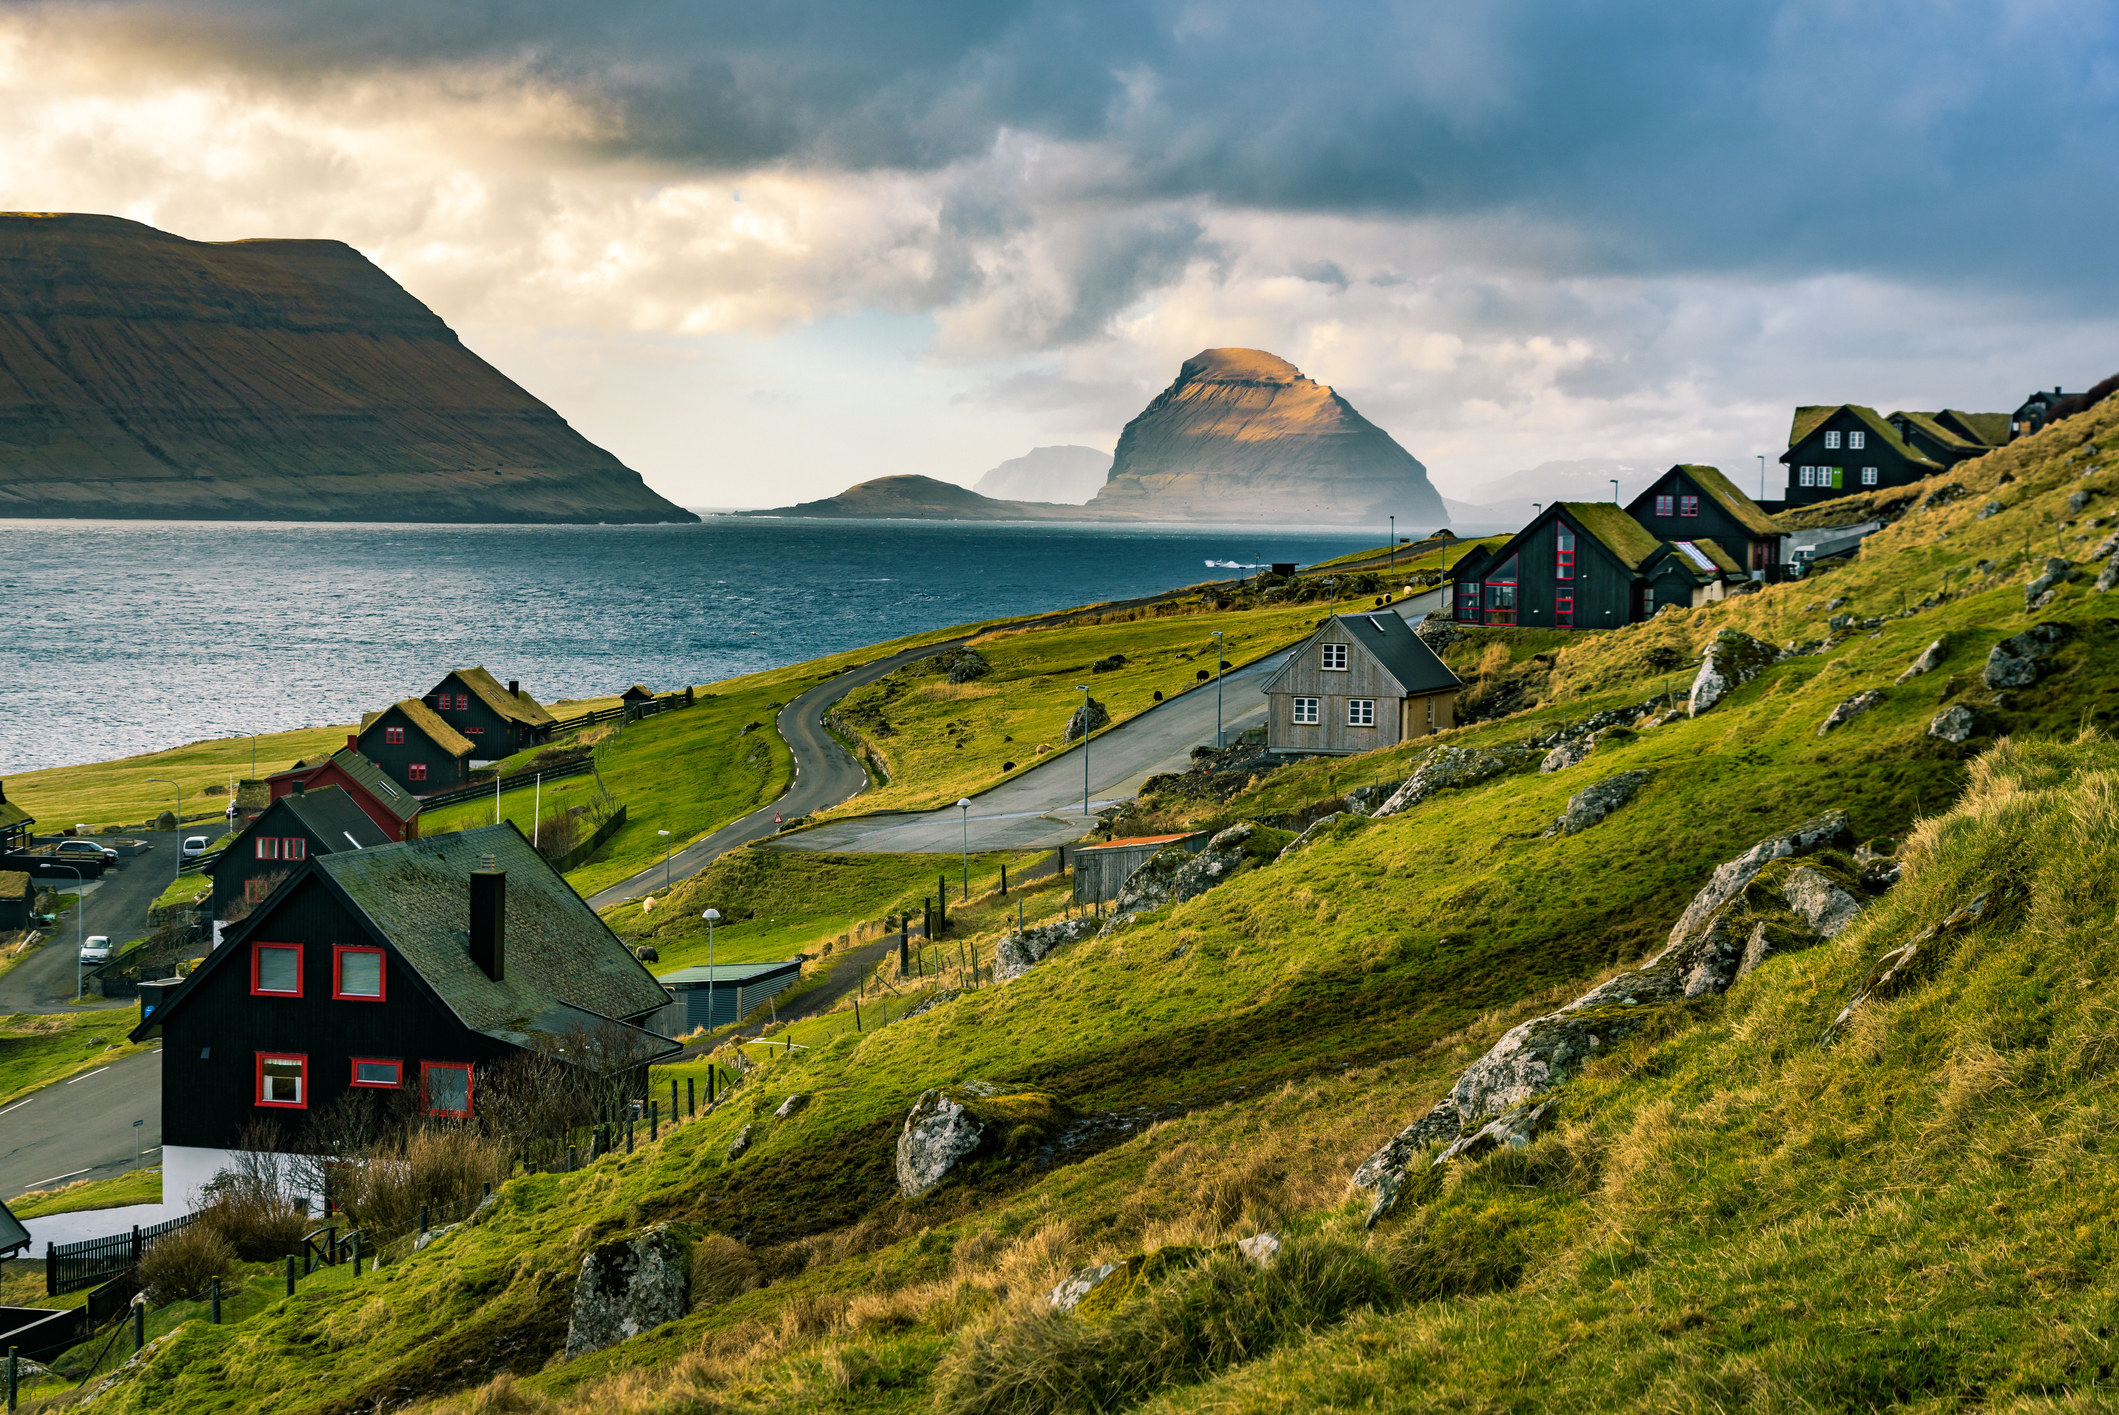 A traditional town in the Faroe Islands